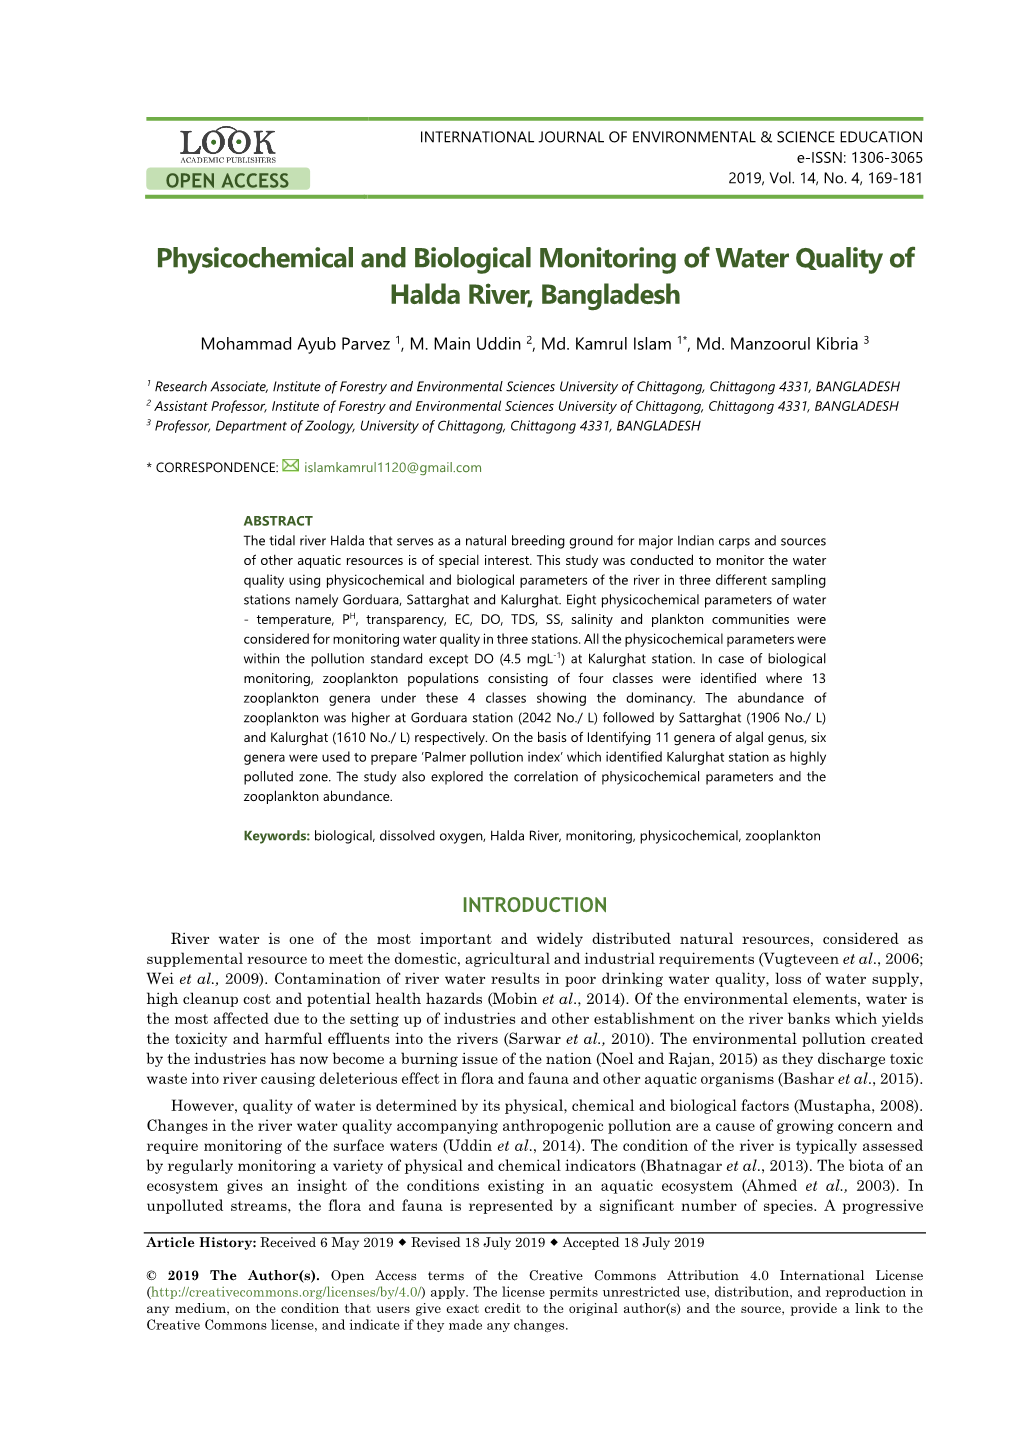 Physicochemical and Biological Monitoring of Water Quality of Halda River, Bangladesh